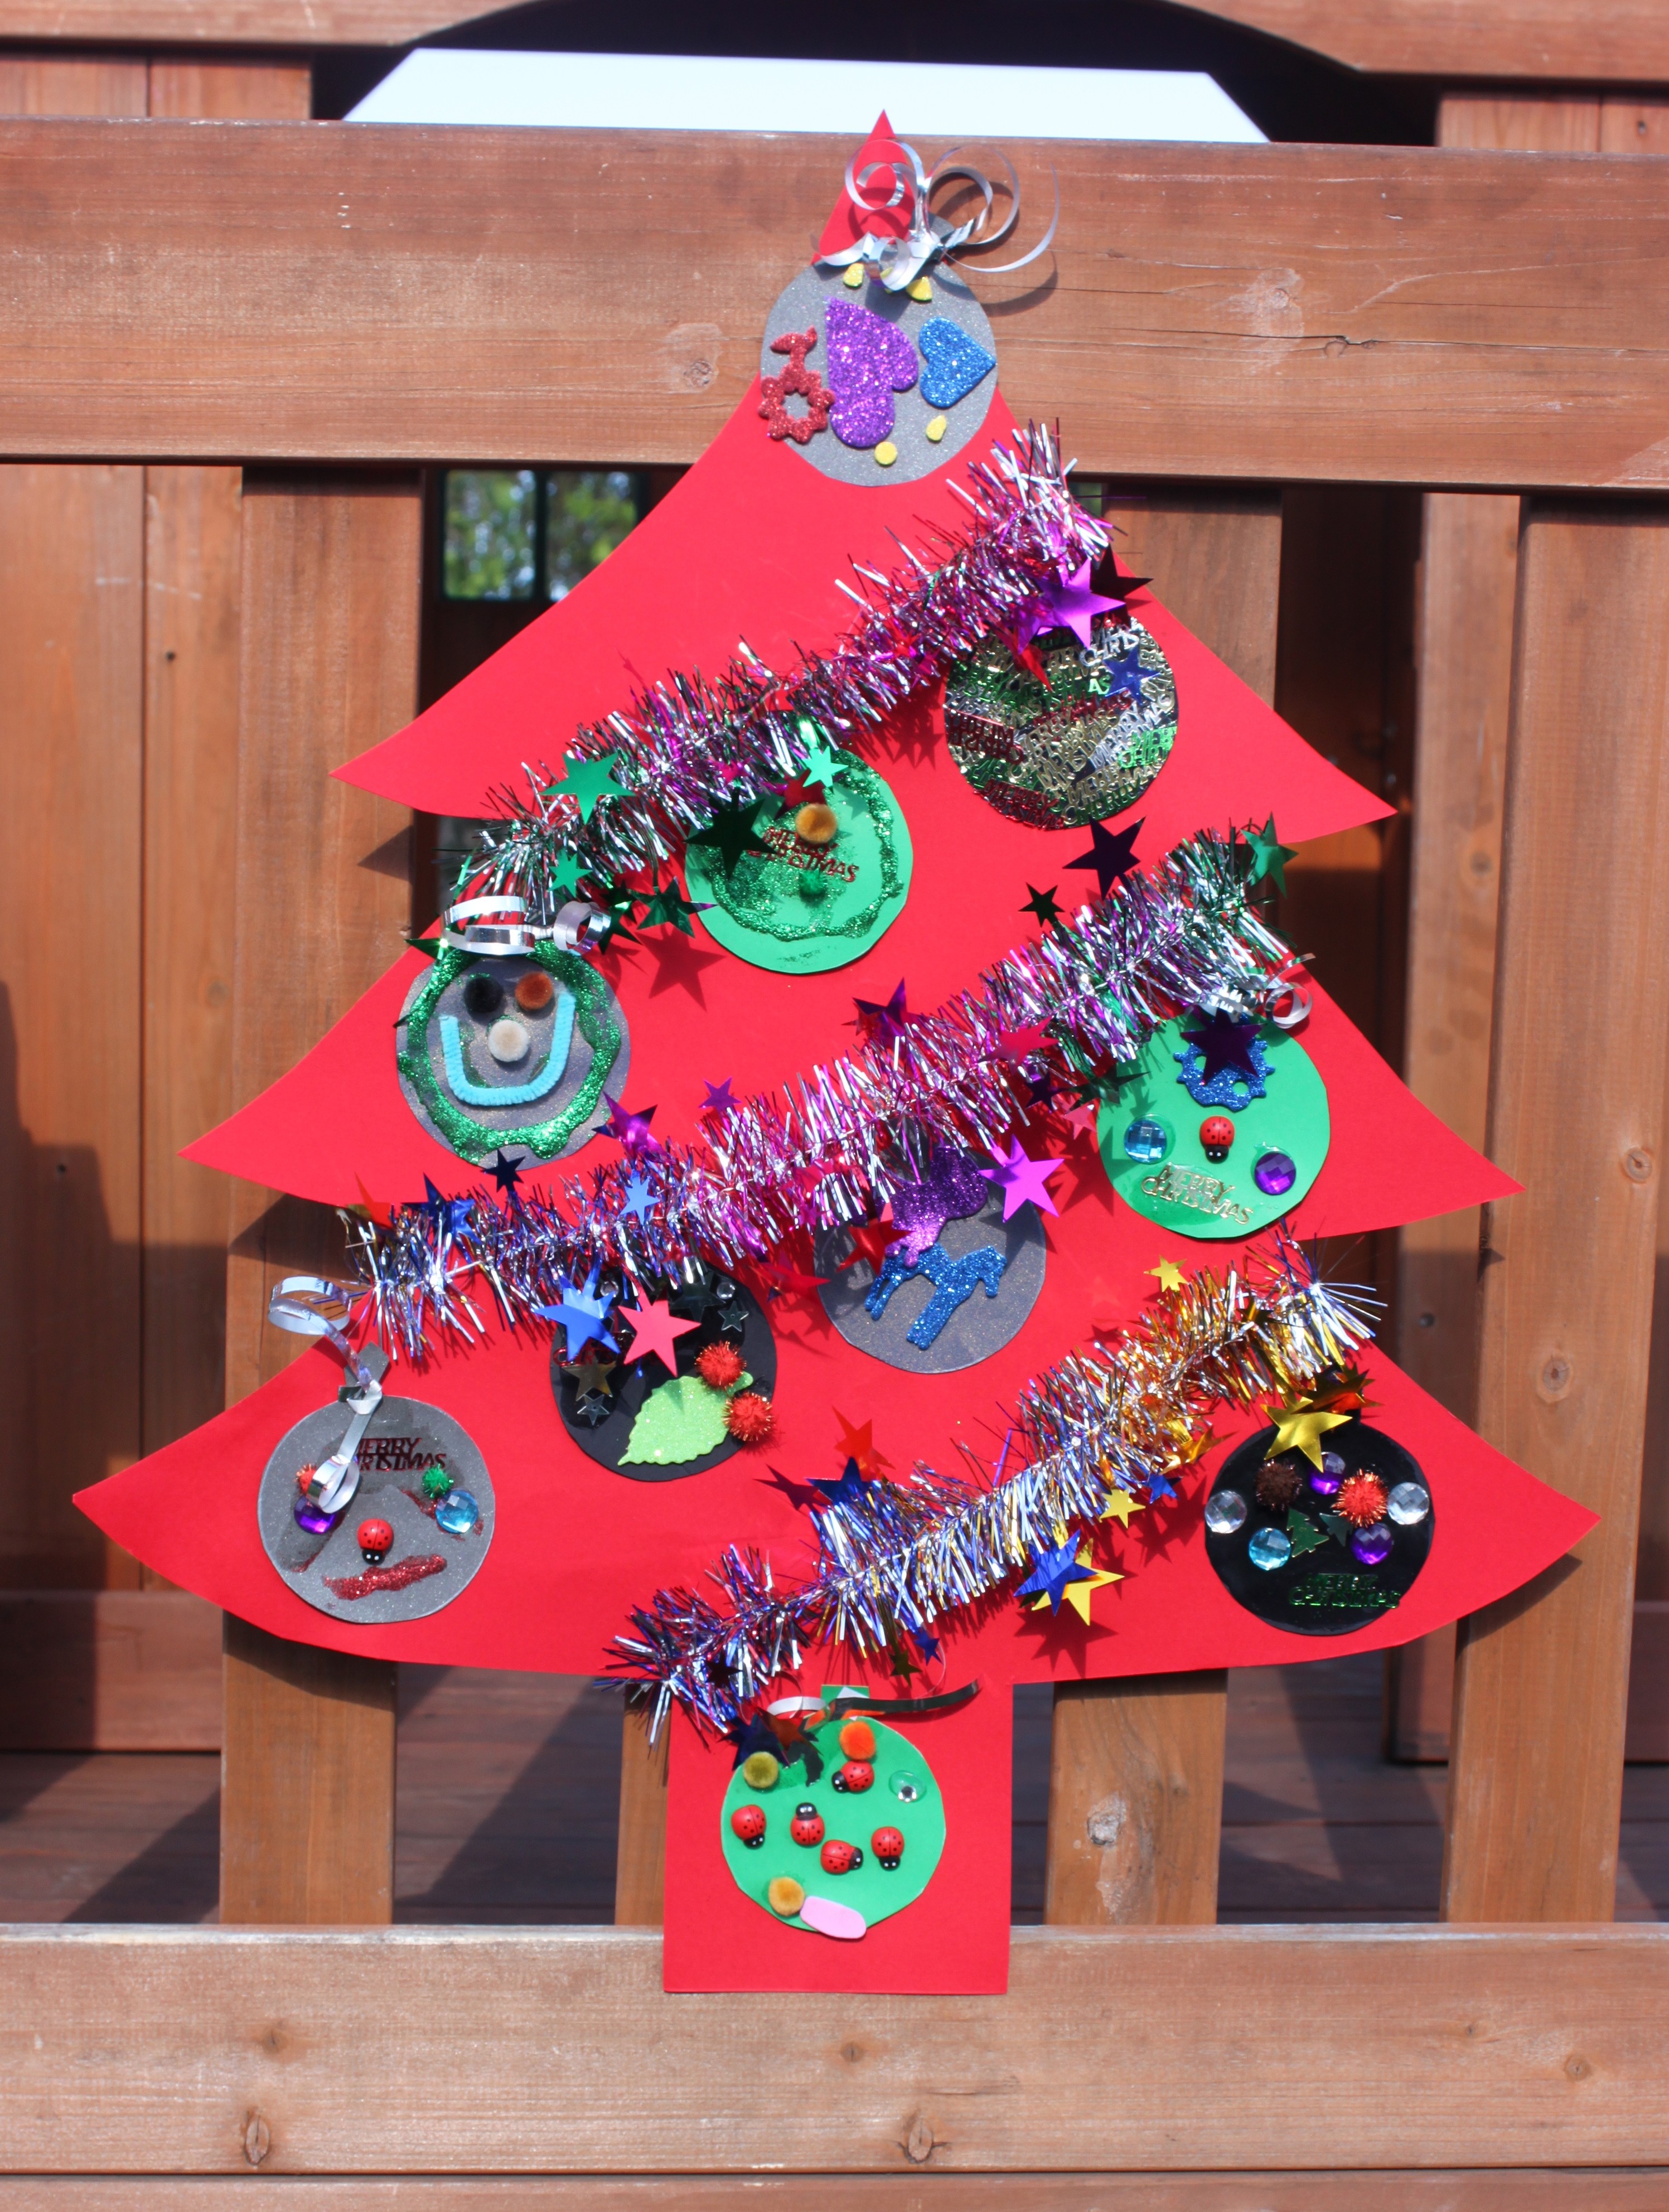 Christmas tree crafts for kids | Crafts and Worksheets for Preschool ...